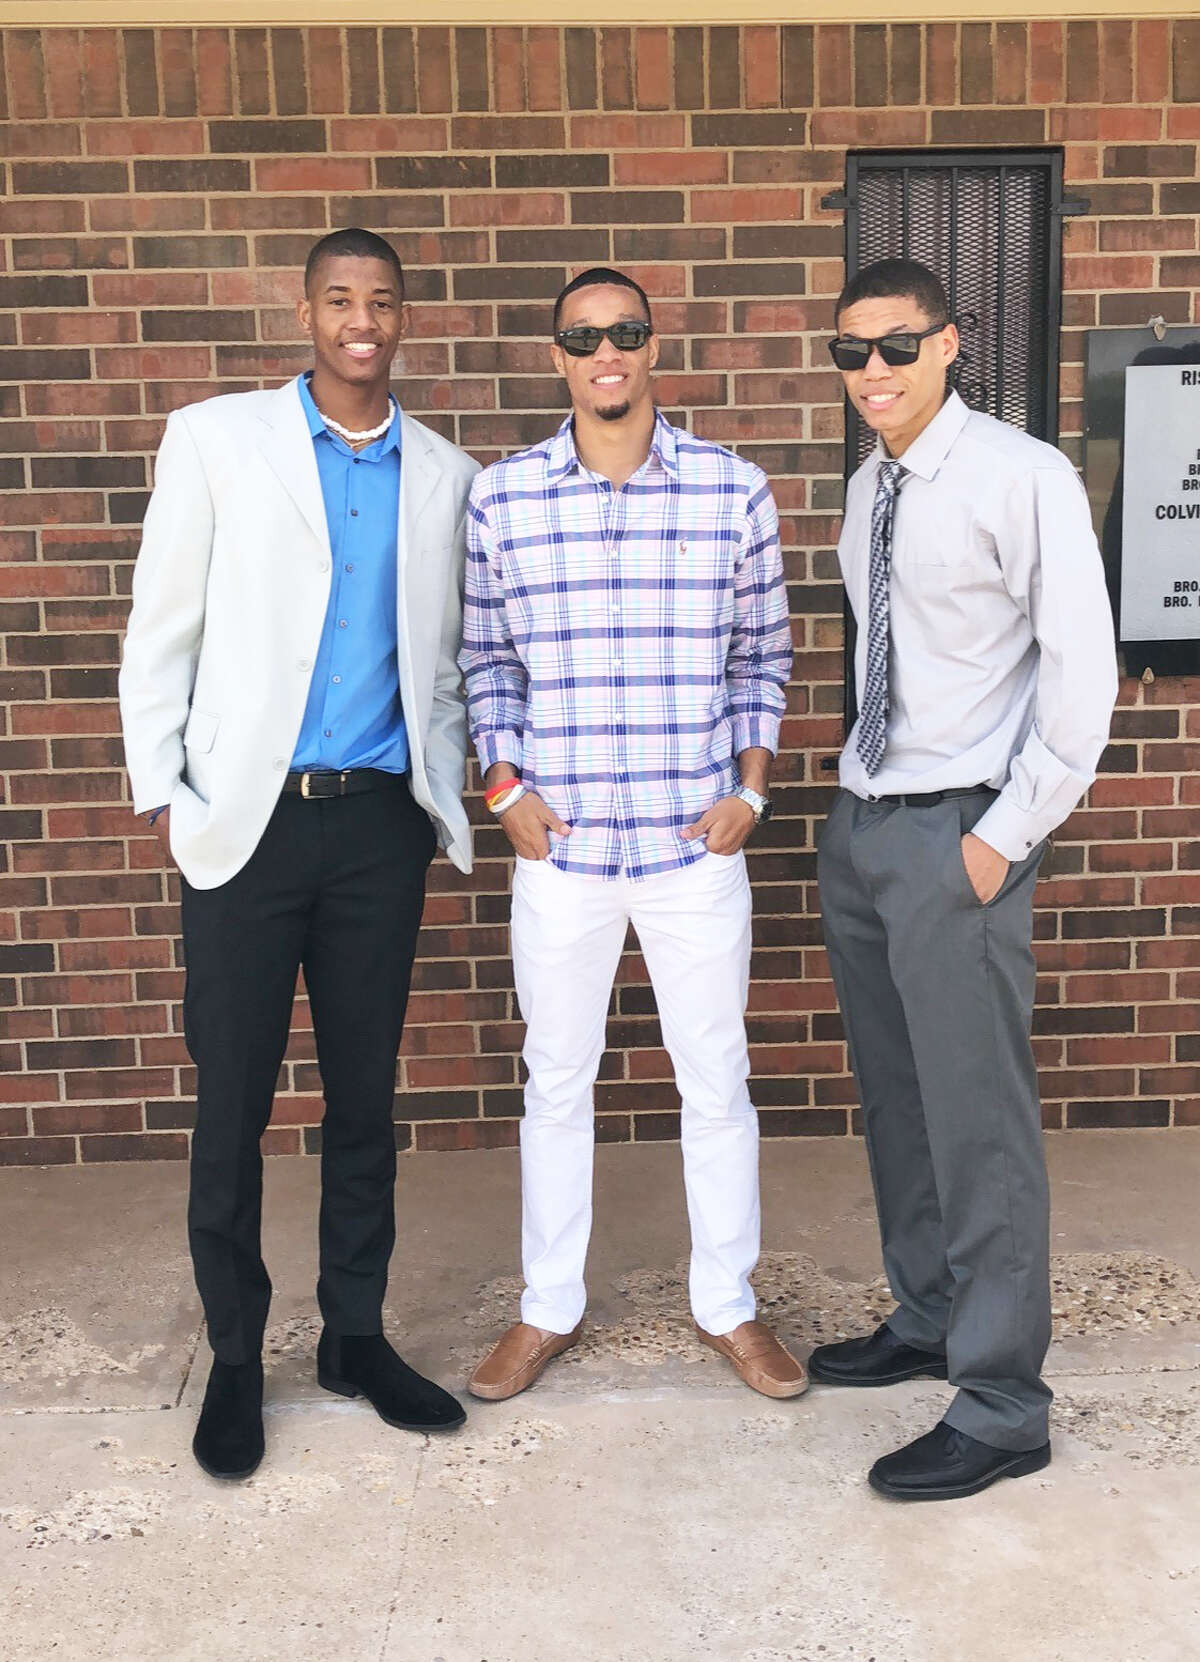 BROTHERLY LOVE While going different paths and pursuing different interests, (pictured left to right) Culver brothers Jarrett, a sophomore guard at Texas Tech, Trey, a Texas Tech graduate and high jumper, and JJ, a junior guard Wayland Baptist, are competitive but support and help one another.